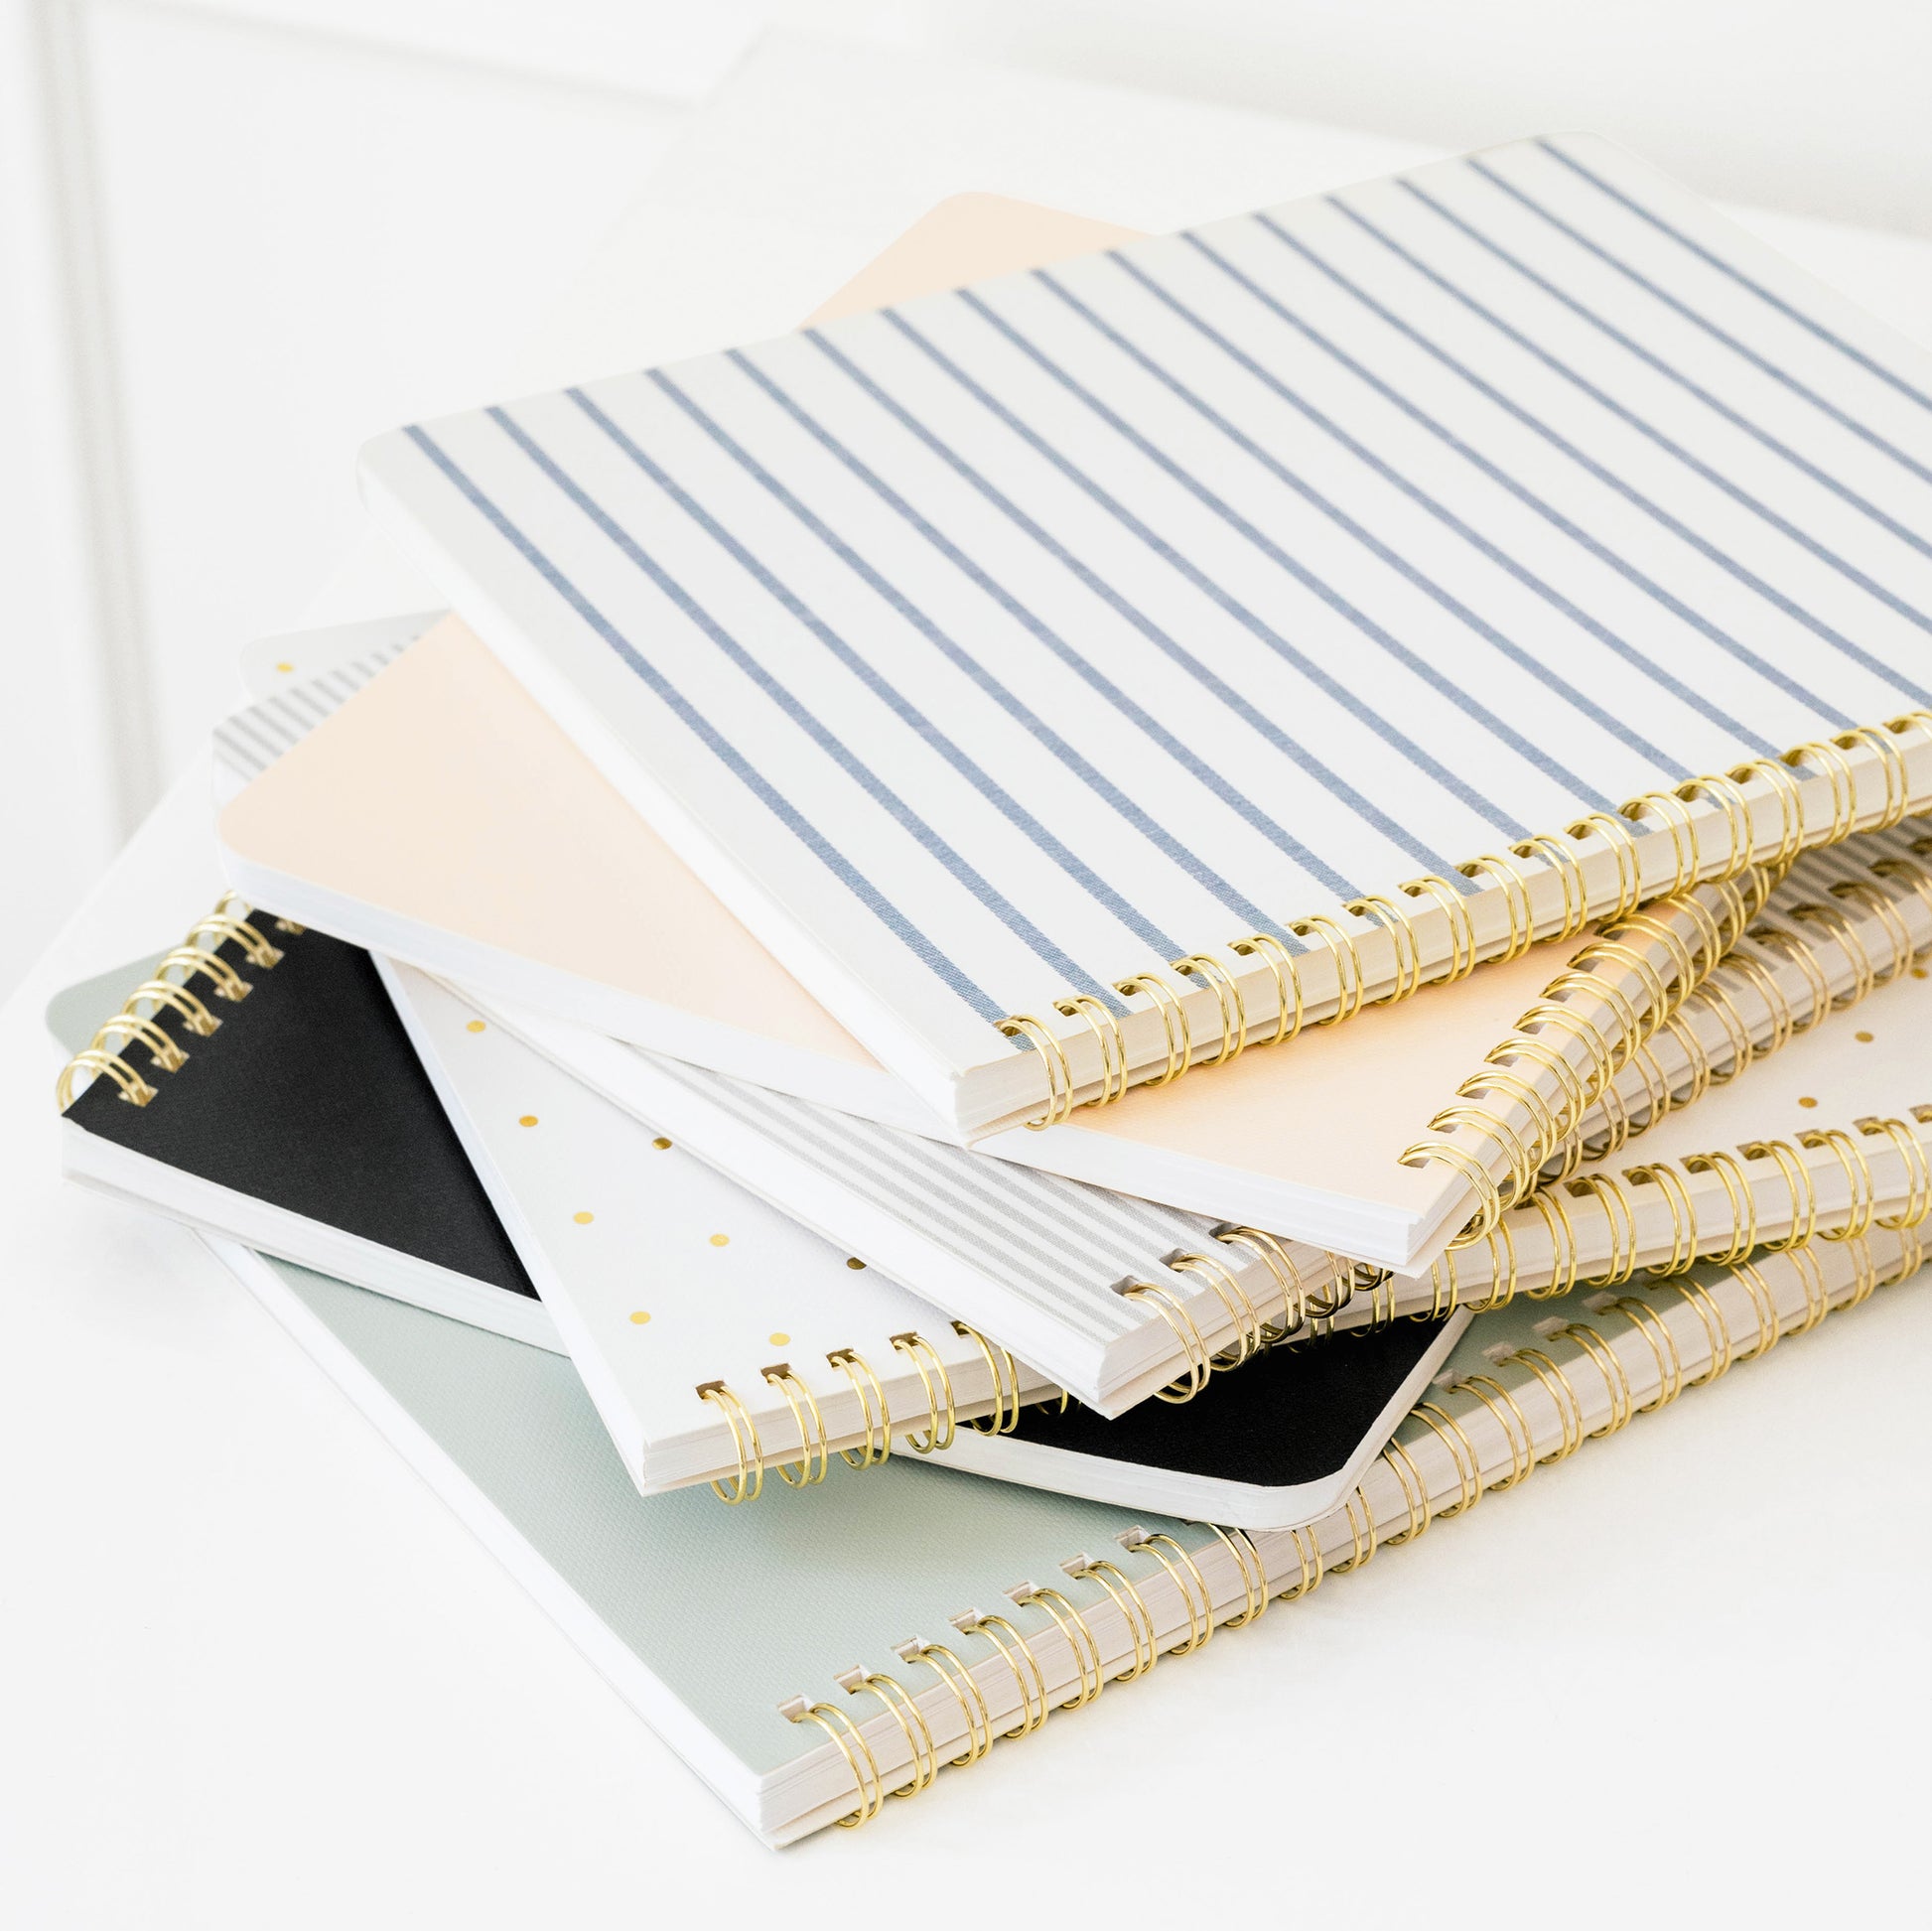 High Quality Paper Open-Flat Lined Dotted Notebook